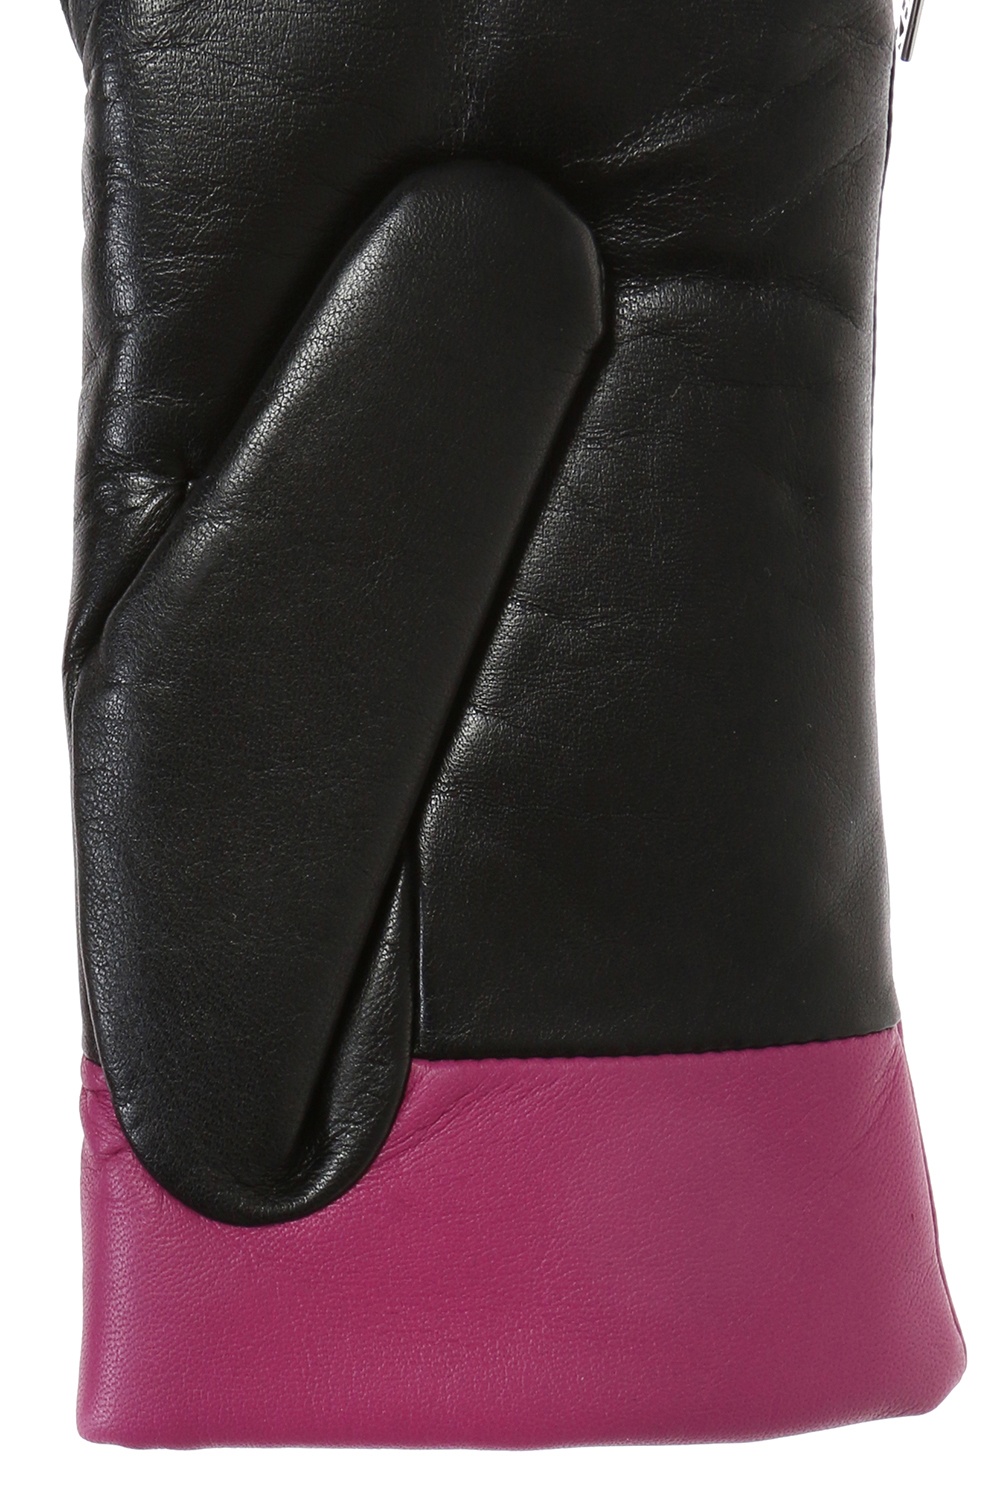 kenzo leather gloves